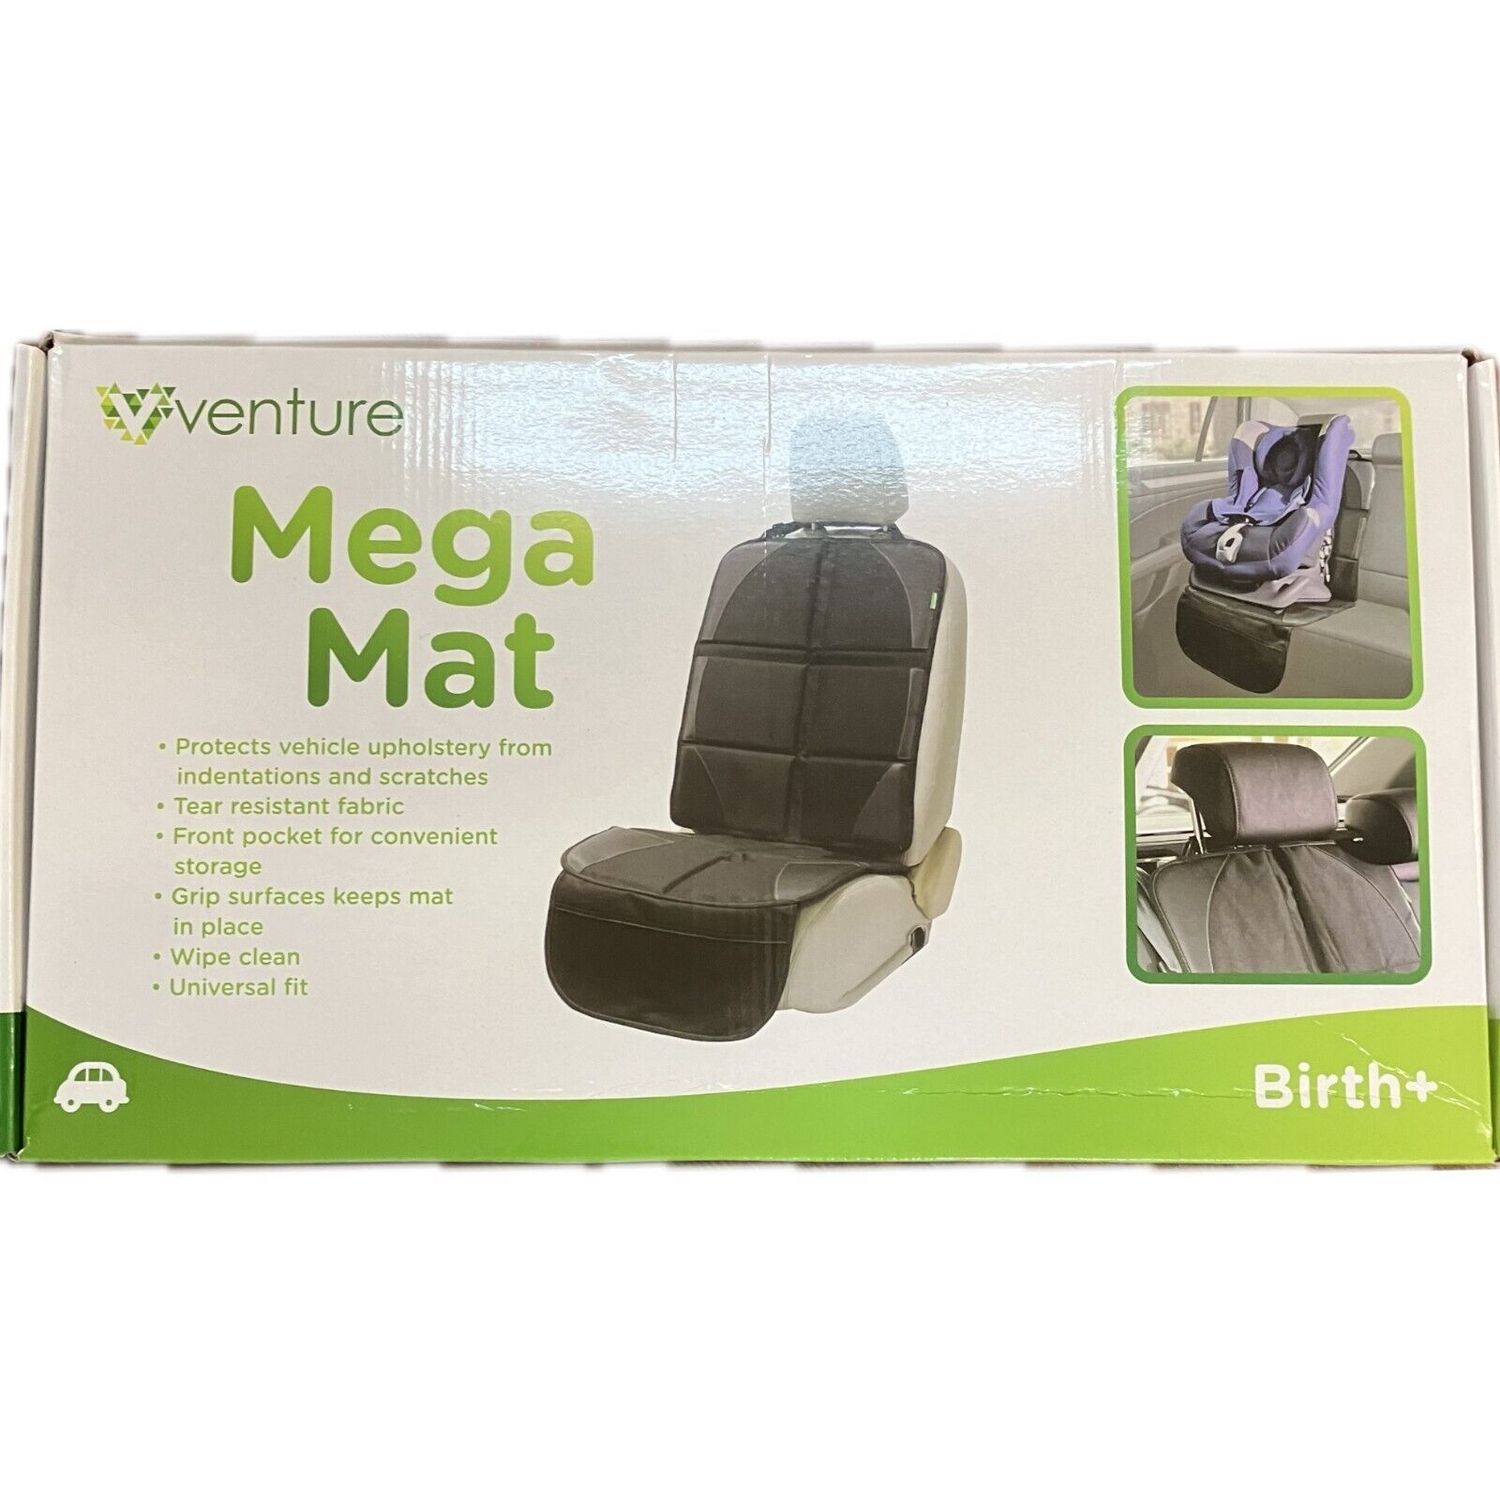 Mega Mat Venture=Protects Vehicle Upholstery from Indentations & scratches